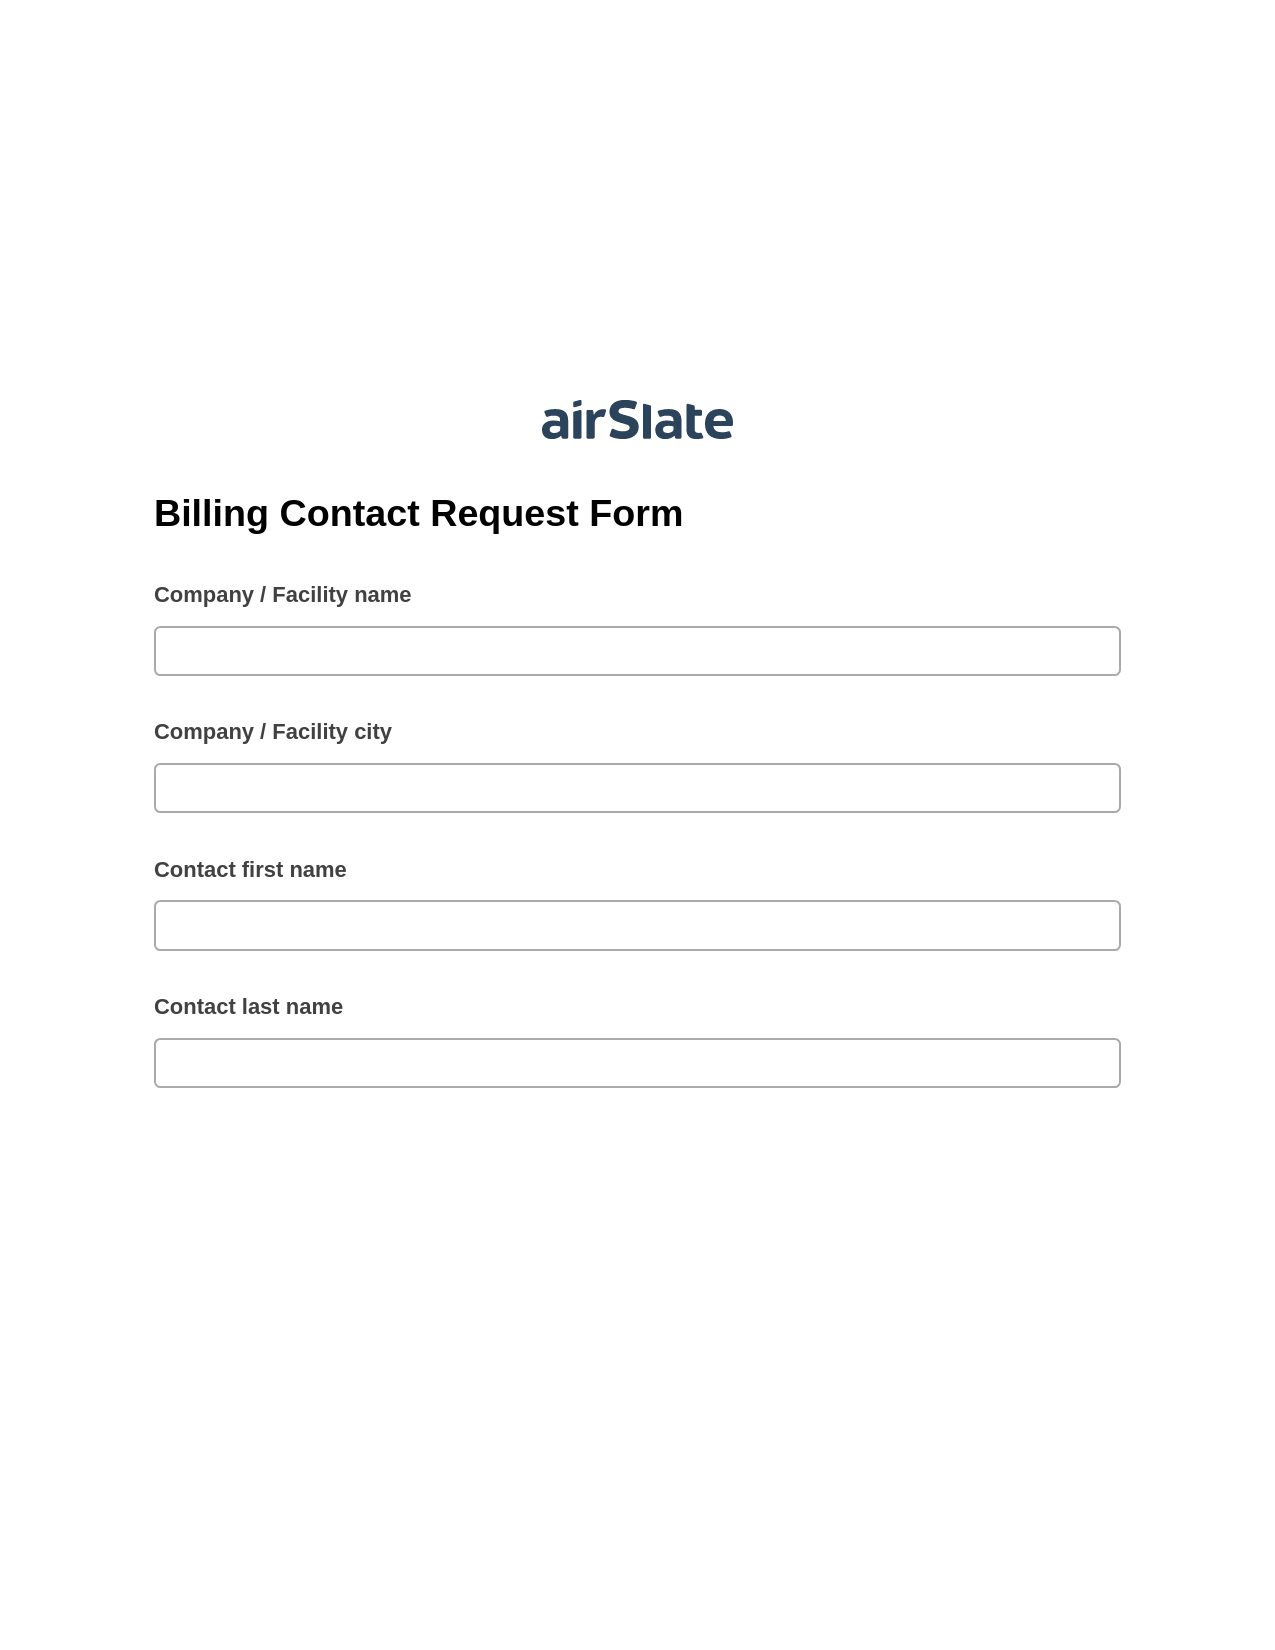 Multirole Billing Contact Request Form Pre-fill Document Bot, Create slate from another Flow Bot, Export to Excel 365 Bot